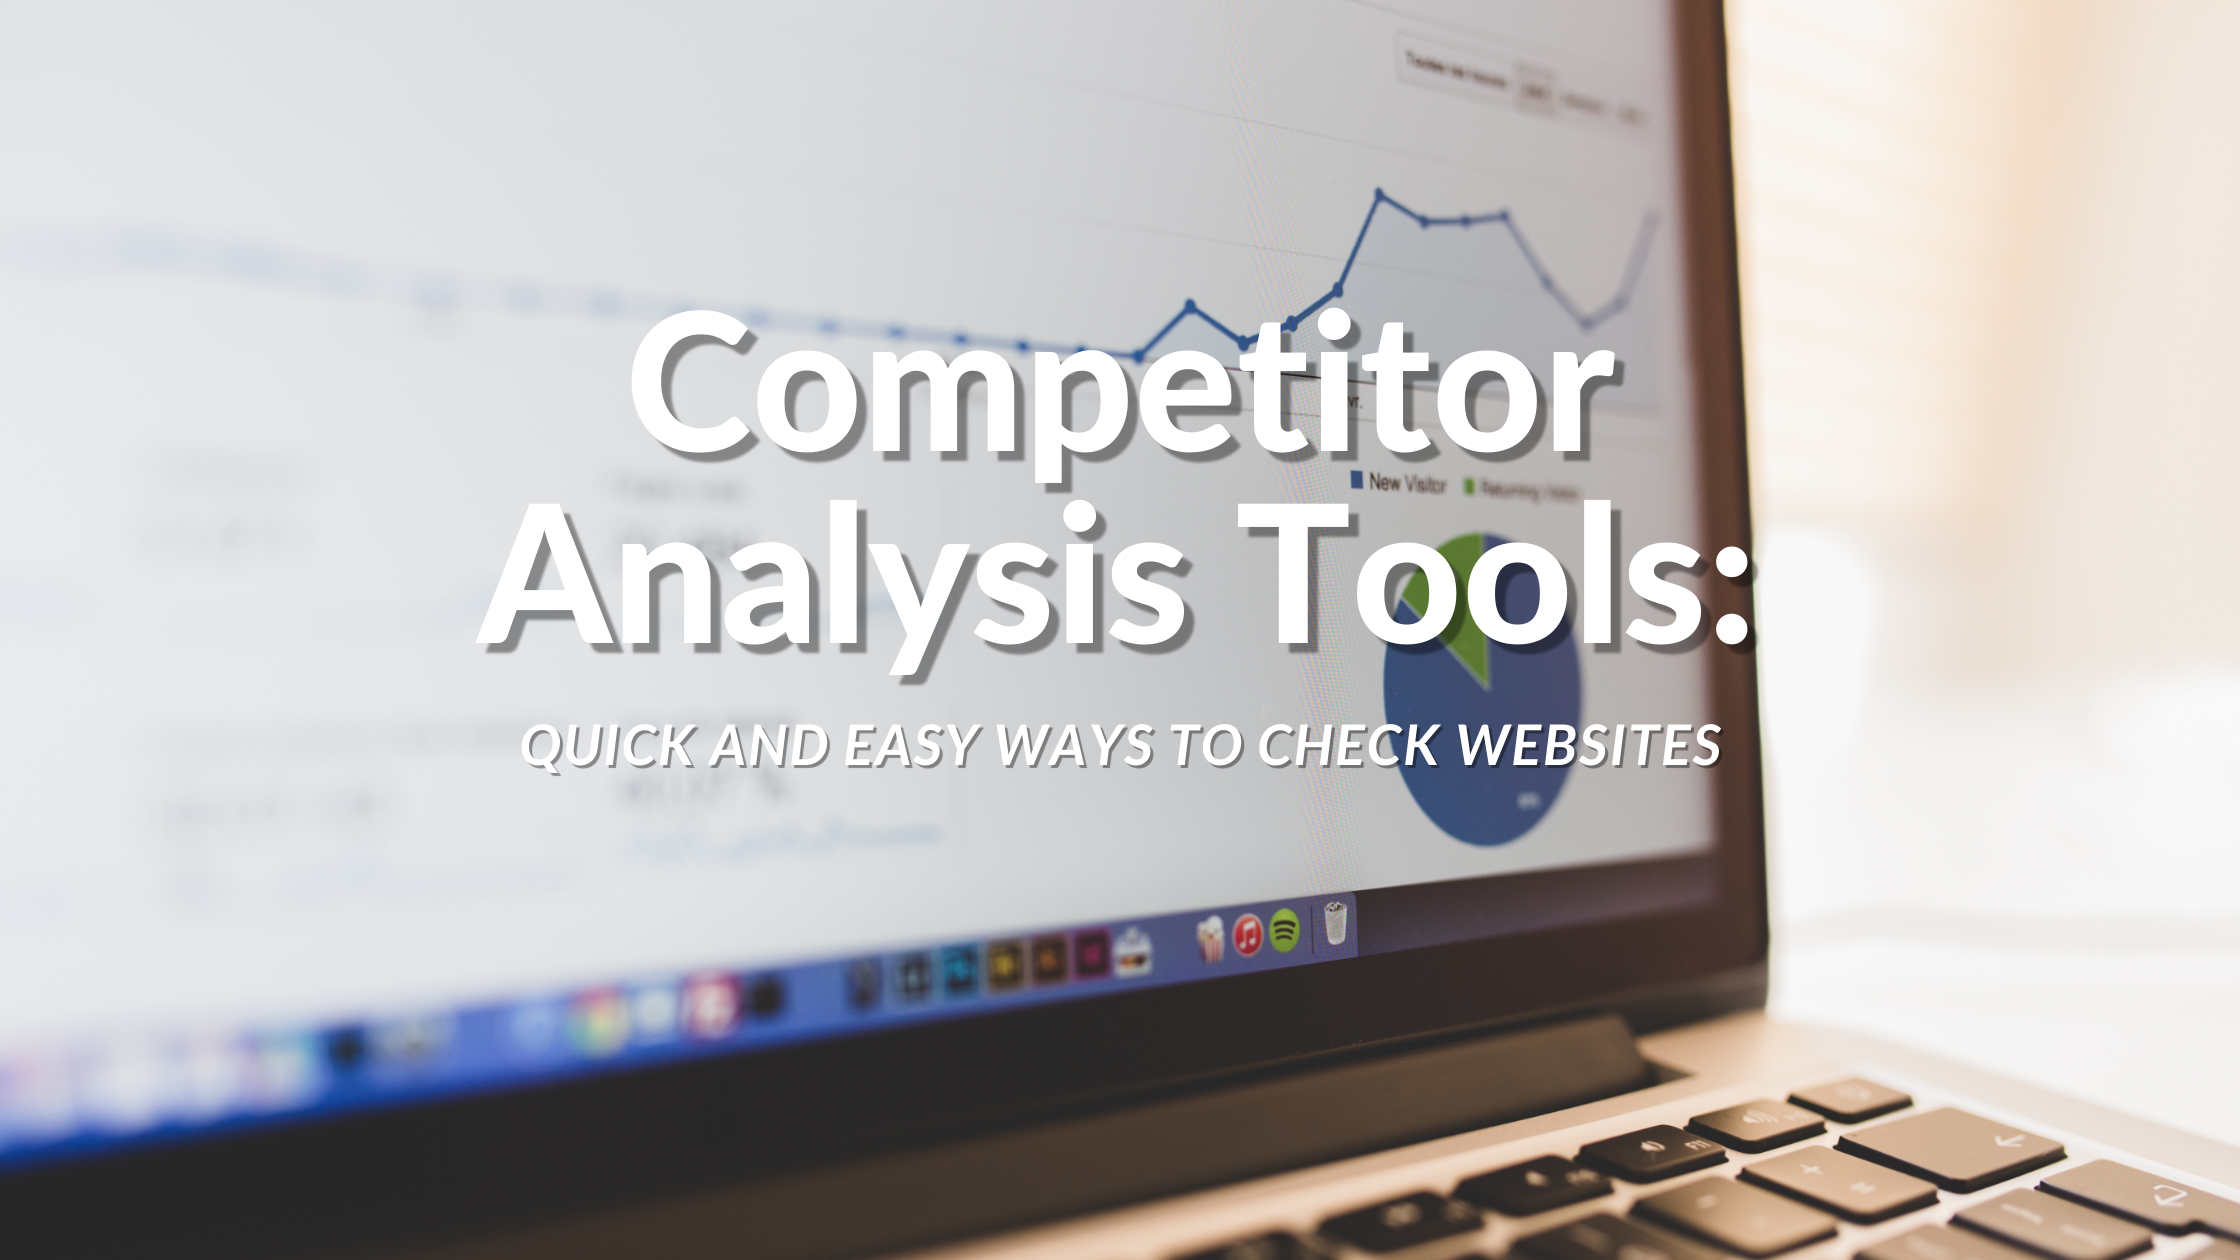 Competitor Analysis Tools: Quick and Easy Ways to Check Websites